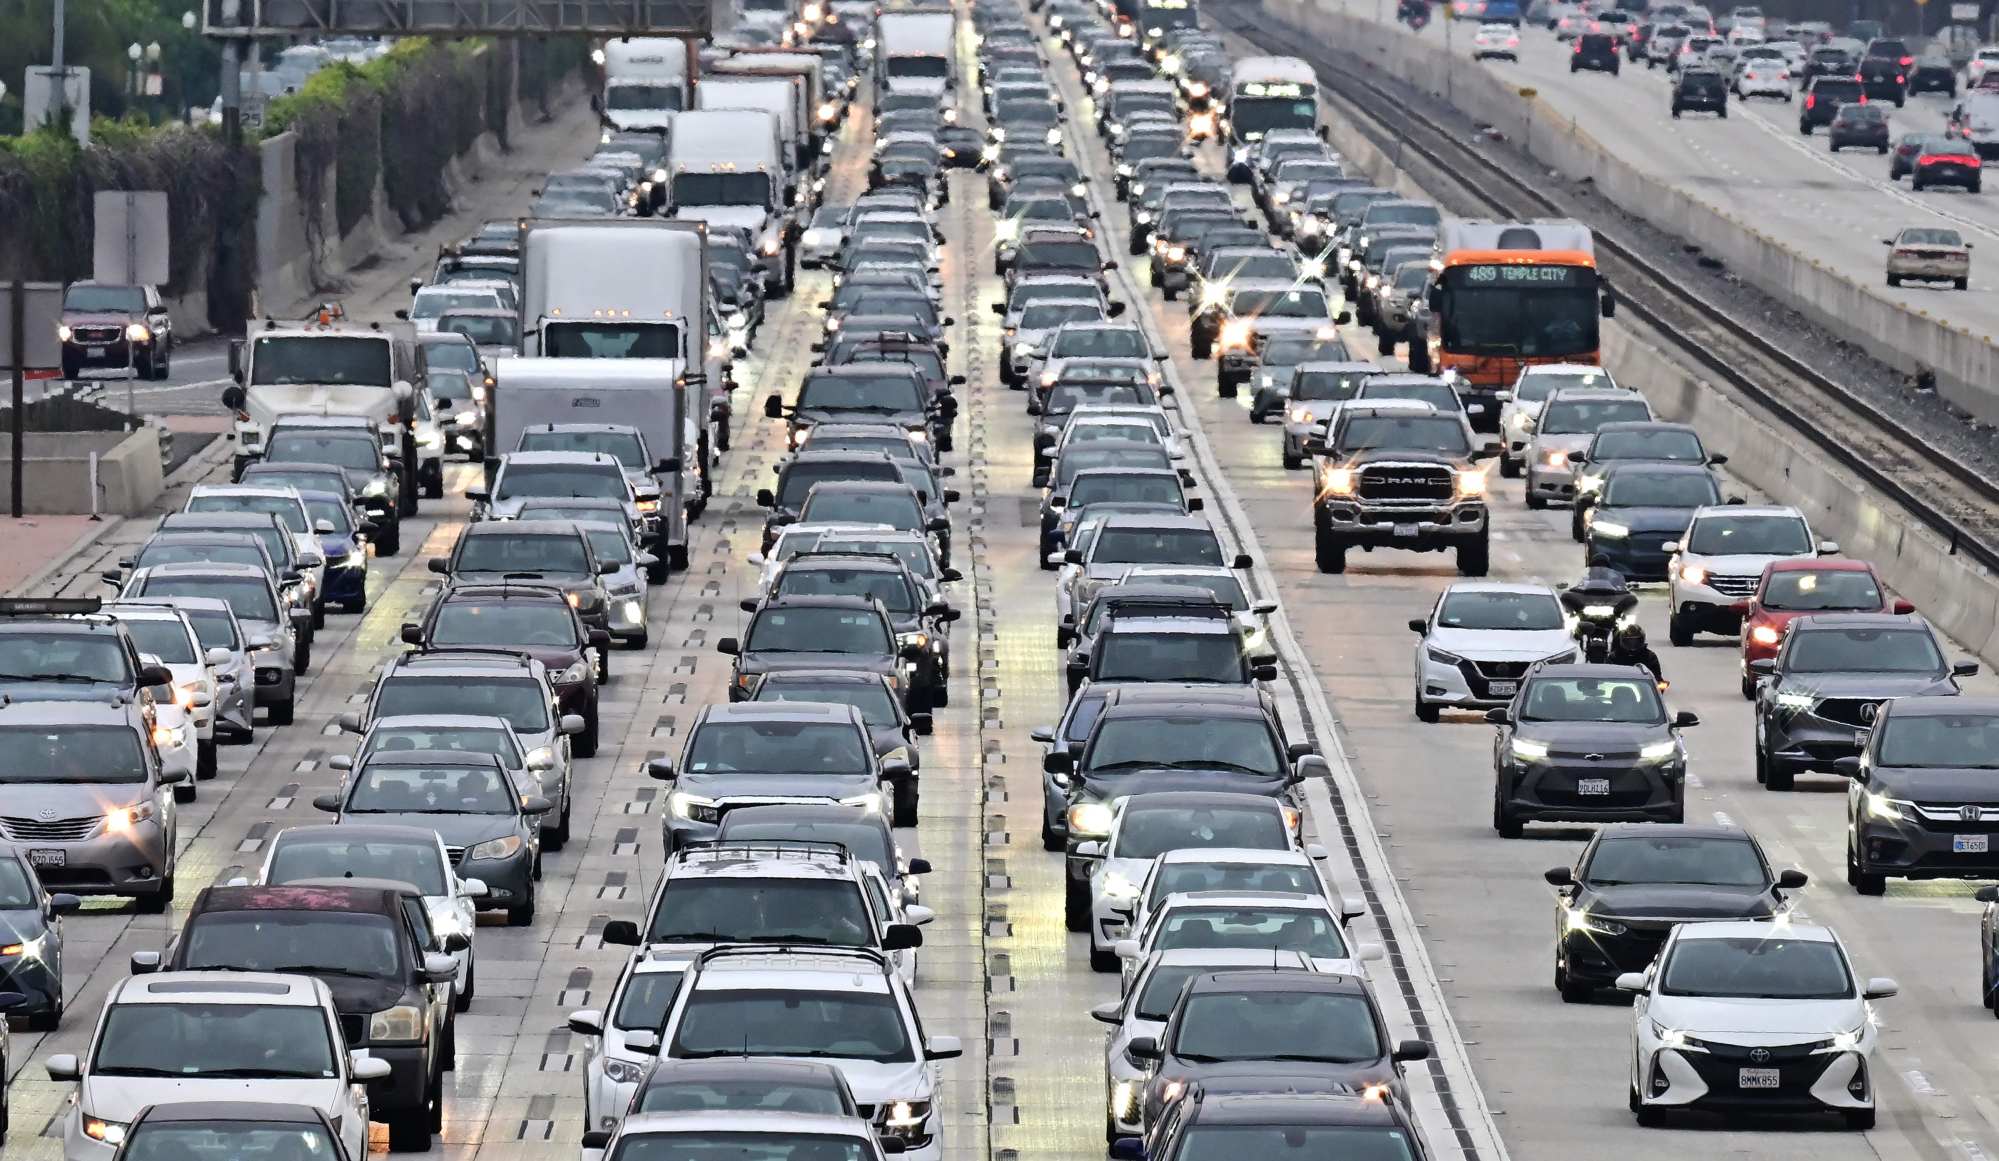 Vehicles head east on a freeway during the evening rush hour commute in Los Angeles, California. Photo: AFP